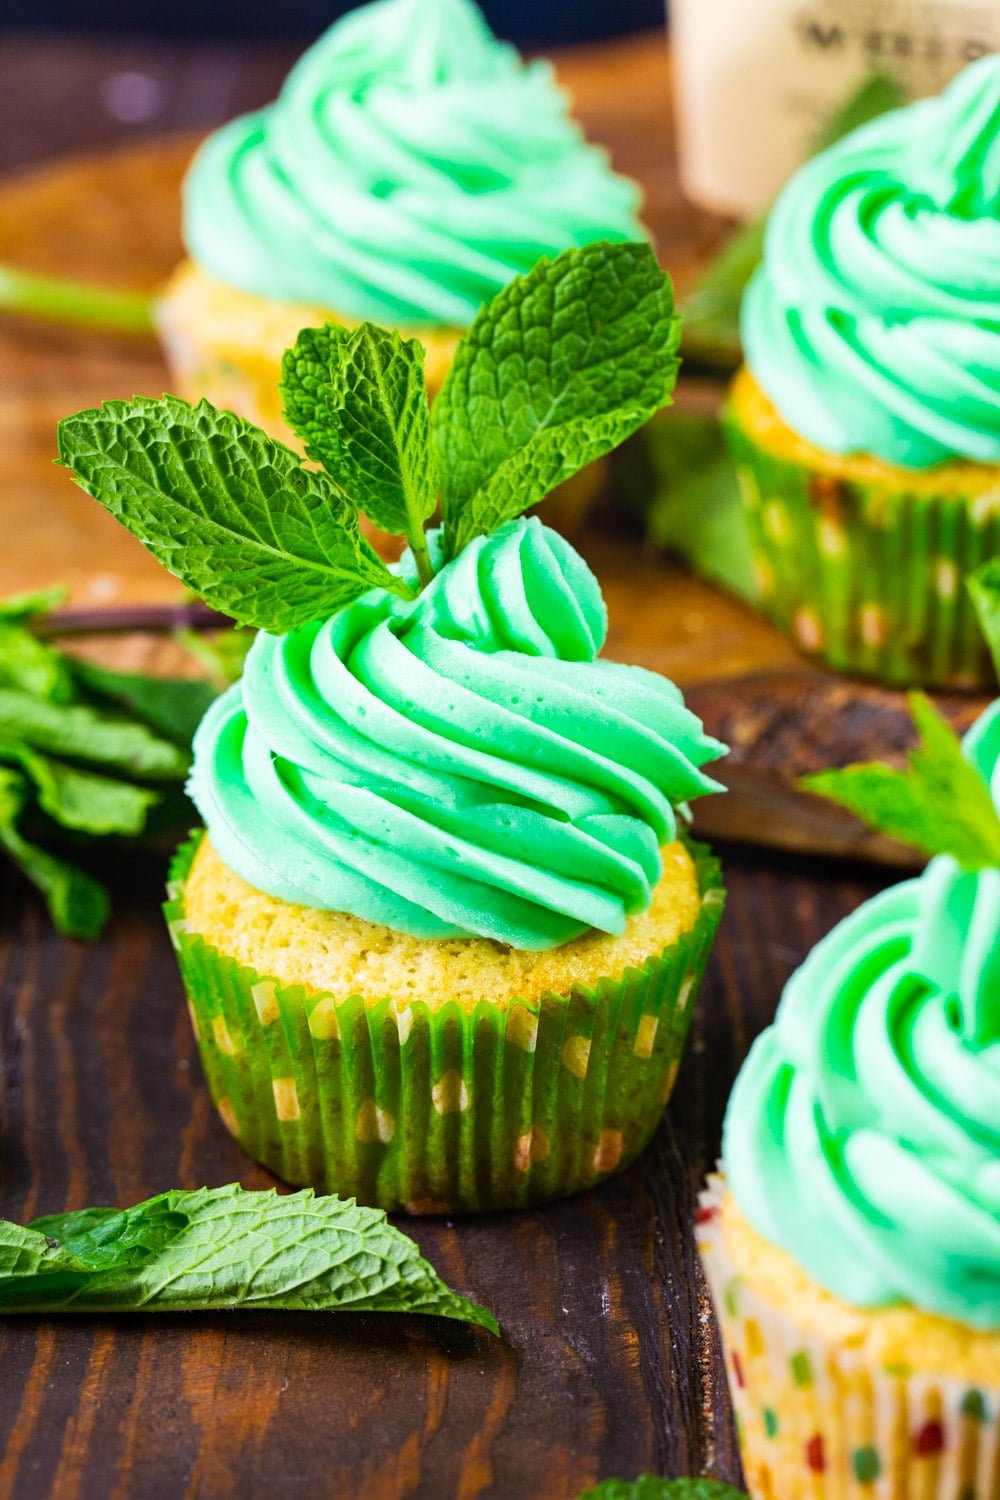 Mint Julep Cupcakes decorated with green icing and mint sprigs.